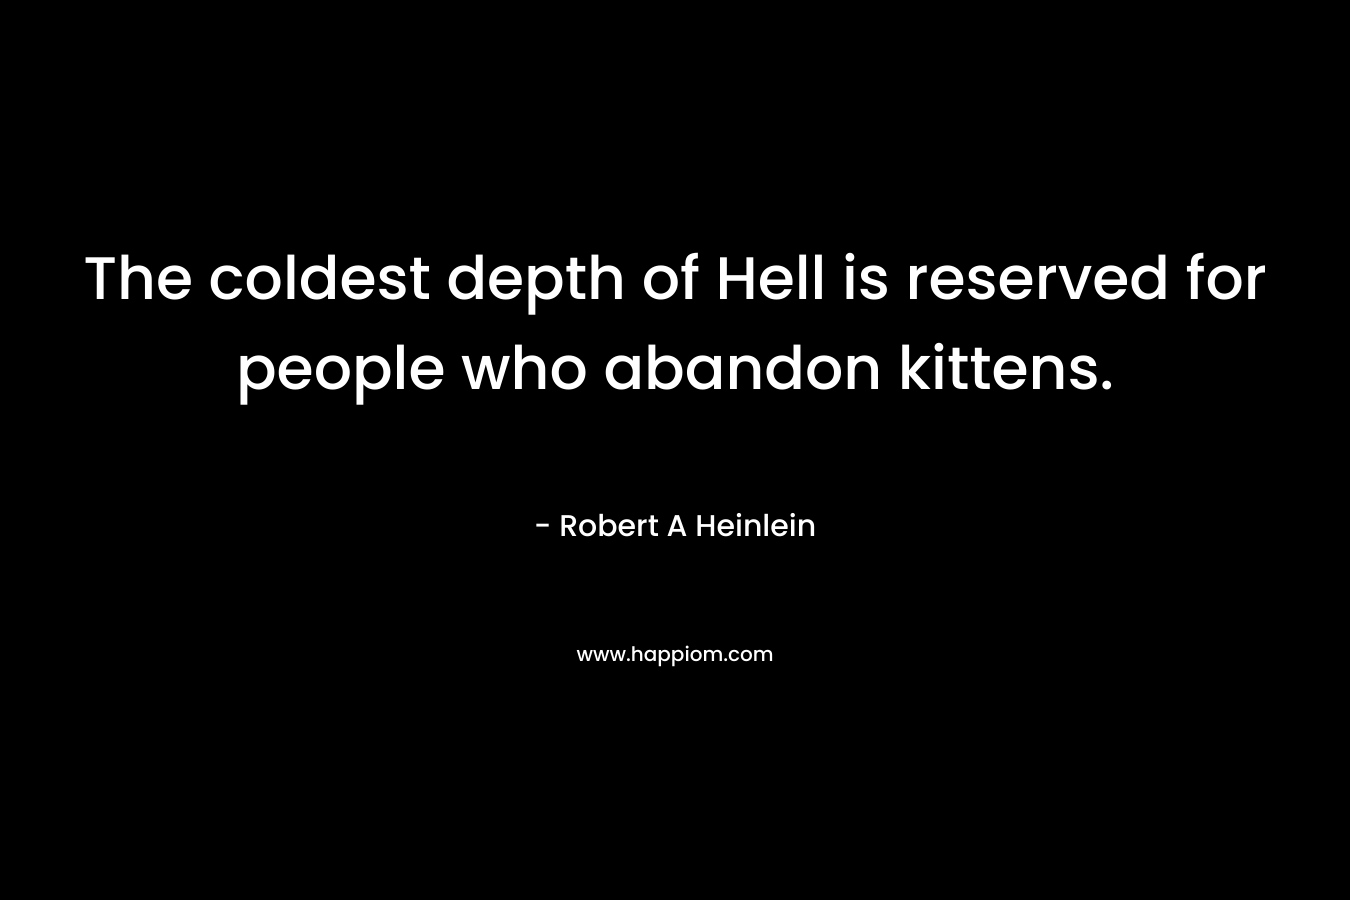 The coldest depth of Hell is reserved for people who abandon kittens. – Robert A Heinlein